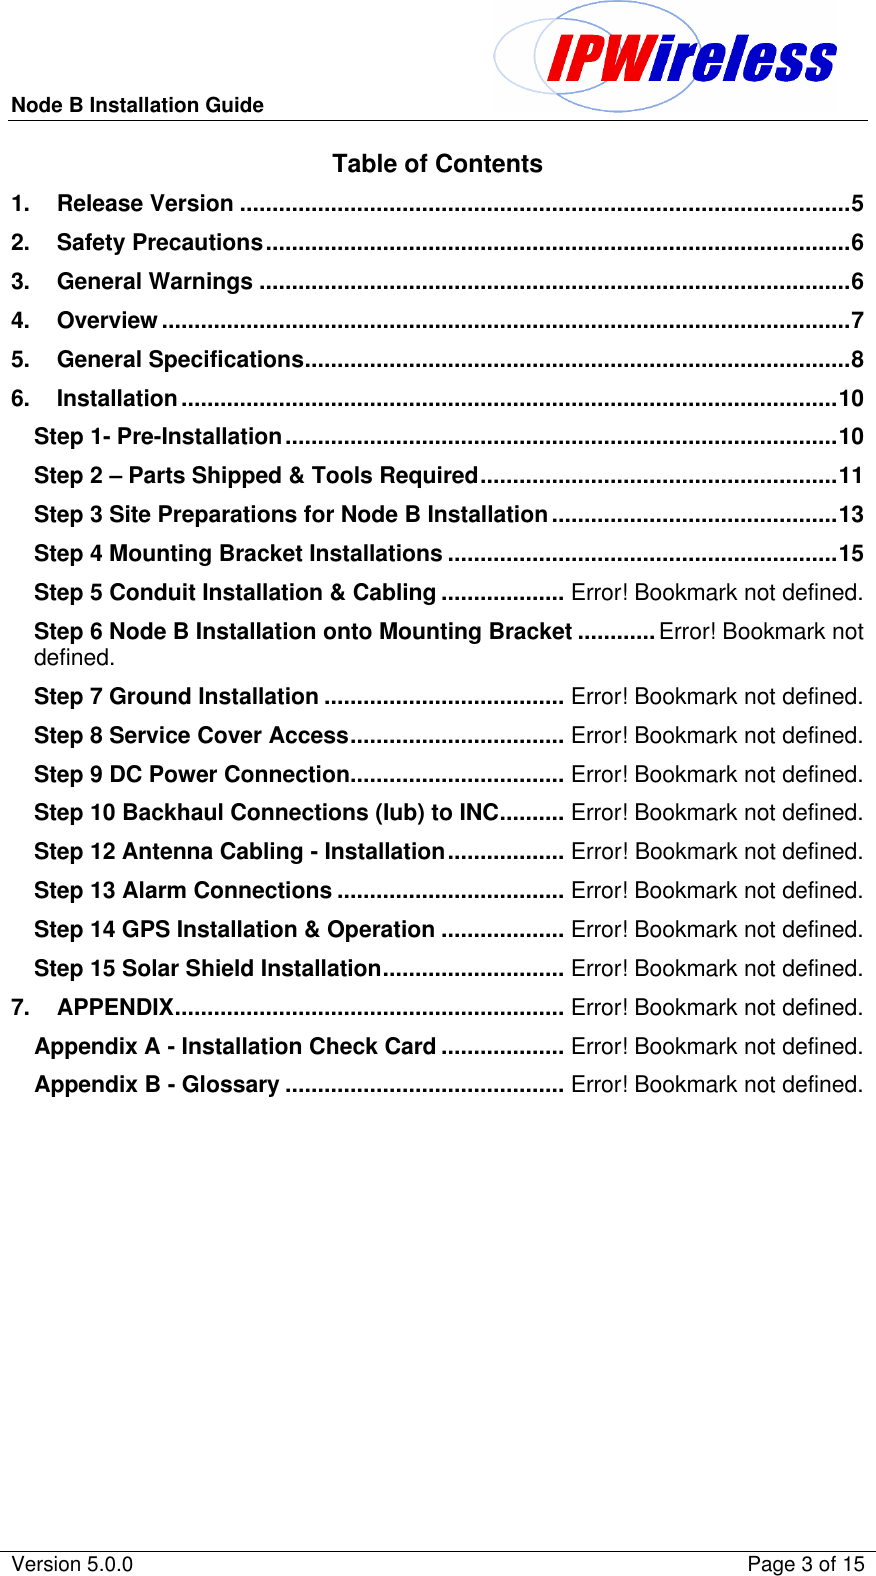 Node B Installation Guide                                               Version 5.0.0    Page 3 of 15  Table of Contents 1. Release Version ..............................................................................................5 2. Safety Precautions..........................................................................................6 3. General Warnings ...........................................................................................6 4. Overview..........................................................................................................7 5. General Specifications....................................................................................8 6. Installation.....................................................................................................10 Step 1- Pre-Installation.....................................................................................10 Step 2 – Parts Shipped &amp; Tools Required.......................................................11 Step 3 Site Preparations for Node B Installation............................................13 Step 4 Mounting Bracket Installations ............................................................15 Step 5 Conduit Installation &amp; Cabling ................... Error! Bookmark not defined. Step 6 Node B Installation onto Mounting Bracket ............ Error! Bookmark not defined. Step 7 Ground Installation ..................................... Error! Bookmark not defined. Step 8 Service Cover Access................................. Error! Bookmark not defined. Step 9 DC Power Connection................................. Error! Bookmark not defined. Step 10 Backhaul Connections (Iub) to INC.......... Error! Bookmark not defined. Step 12 Antenna Cabling - Installation.................. Error! Bookmark not defined. Step 13 Alarm Connections ................................... Error! Bookmark not defined. Step 14 GPS Installation &amp; Operation ................... Error! Bookmark not defined. Step 15 Solar Shield Installation............................ Error! Bookmark not defined. 7. APPENDIX............................................................ Error! Bookmark not defined. Appendix A - Installation Check Card ................... Error! Bookmark not defined. Appendix B - Glossary ........................................... Error! Bookmark not defined.  